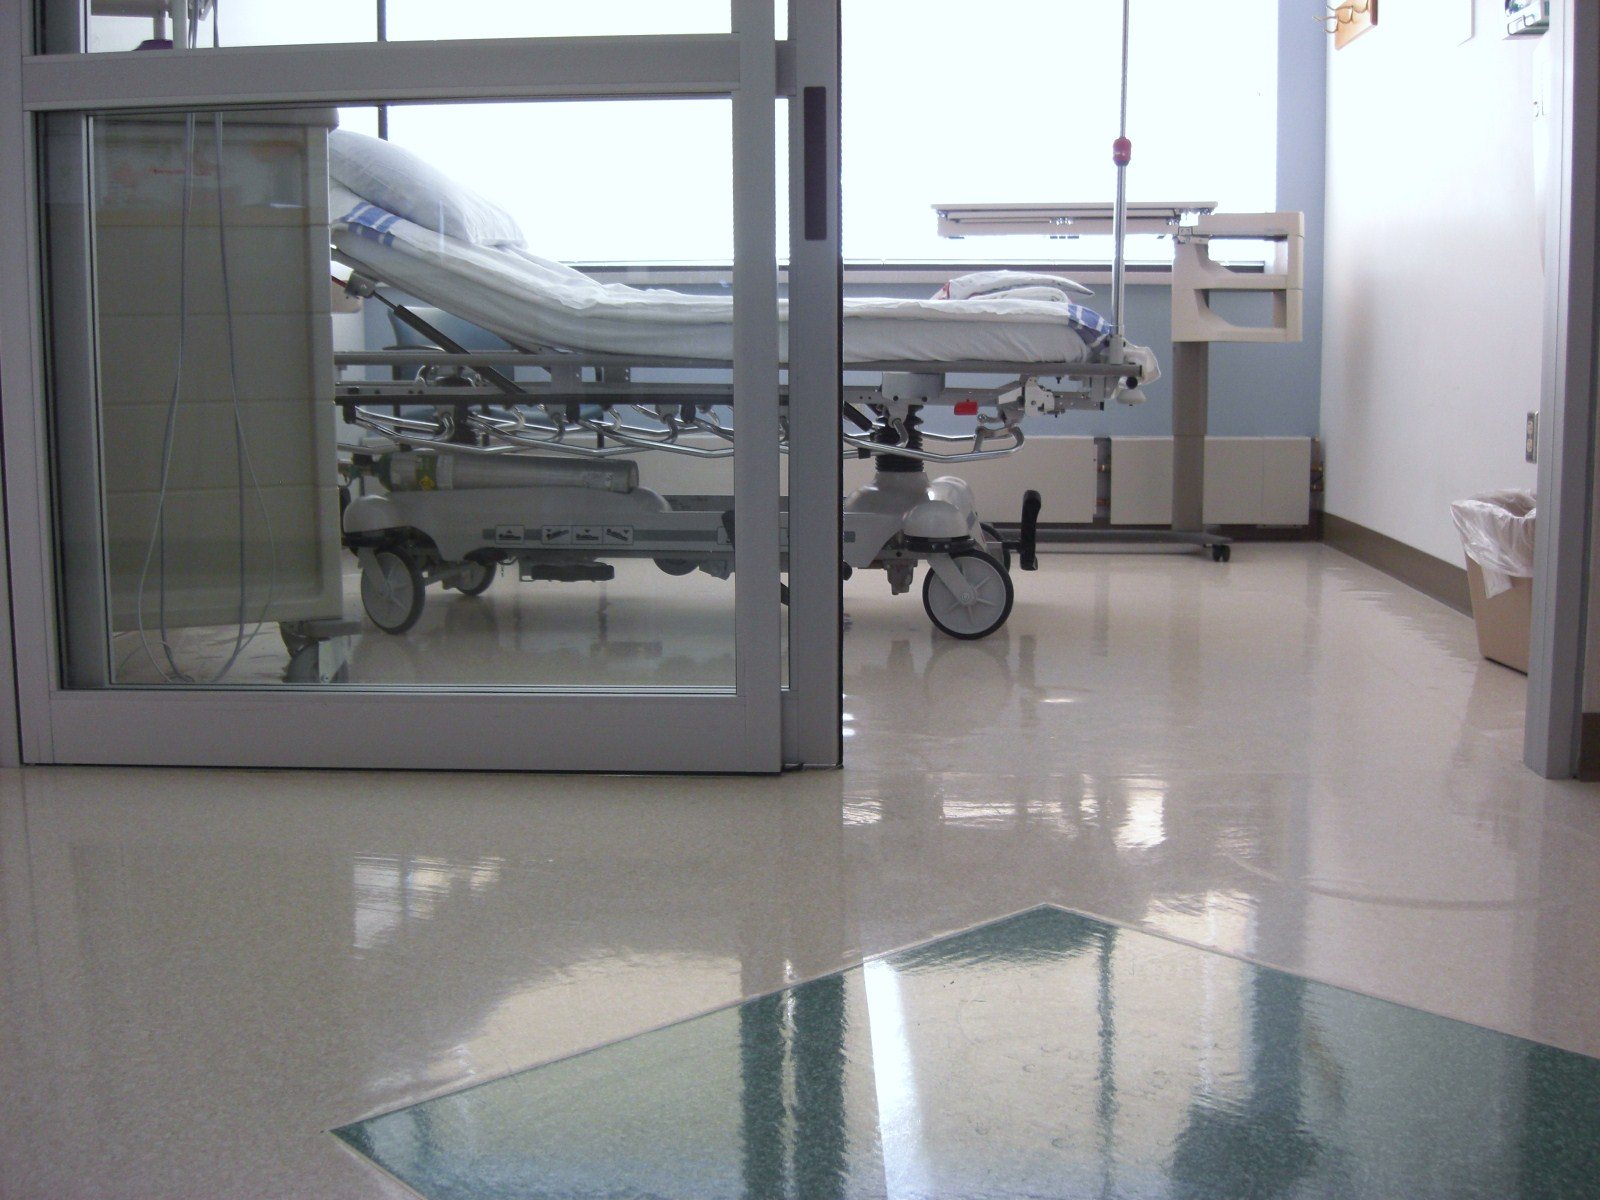 Canadian Centre for Policy Alternatives calling for more efficient operating rooms in BC